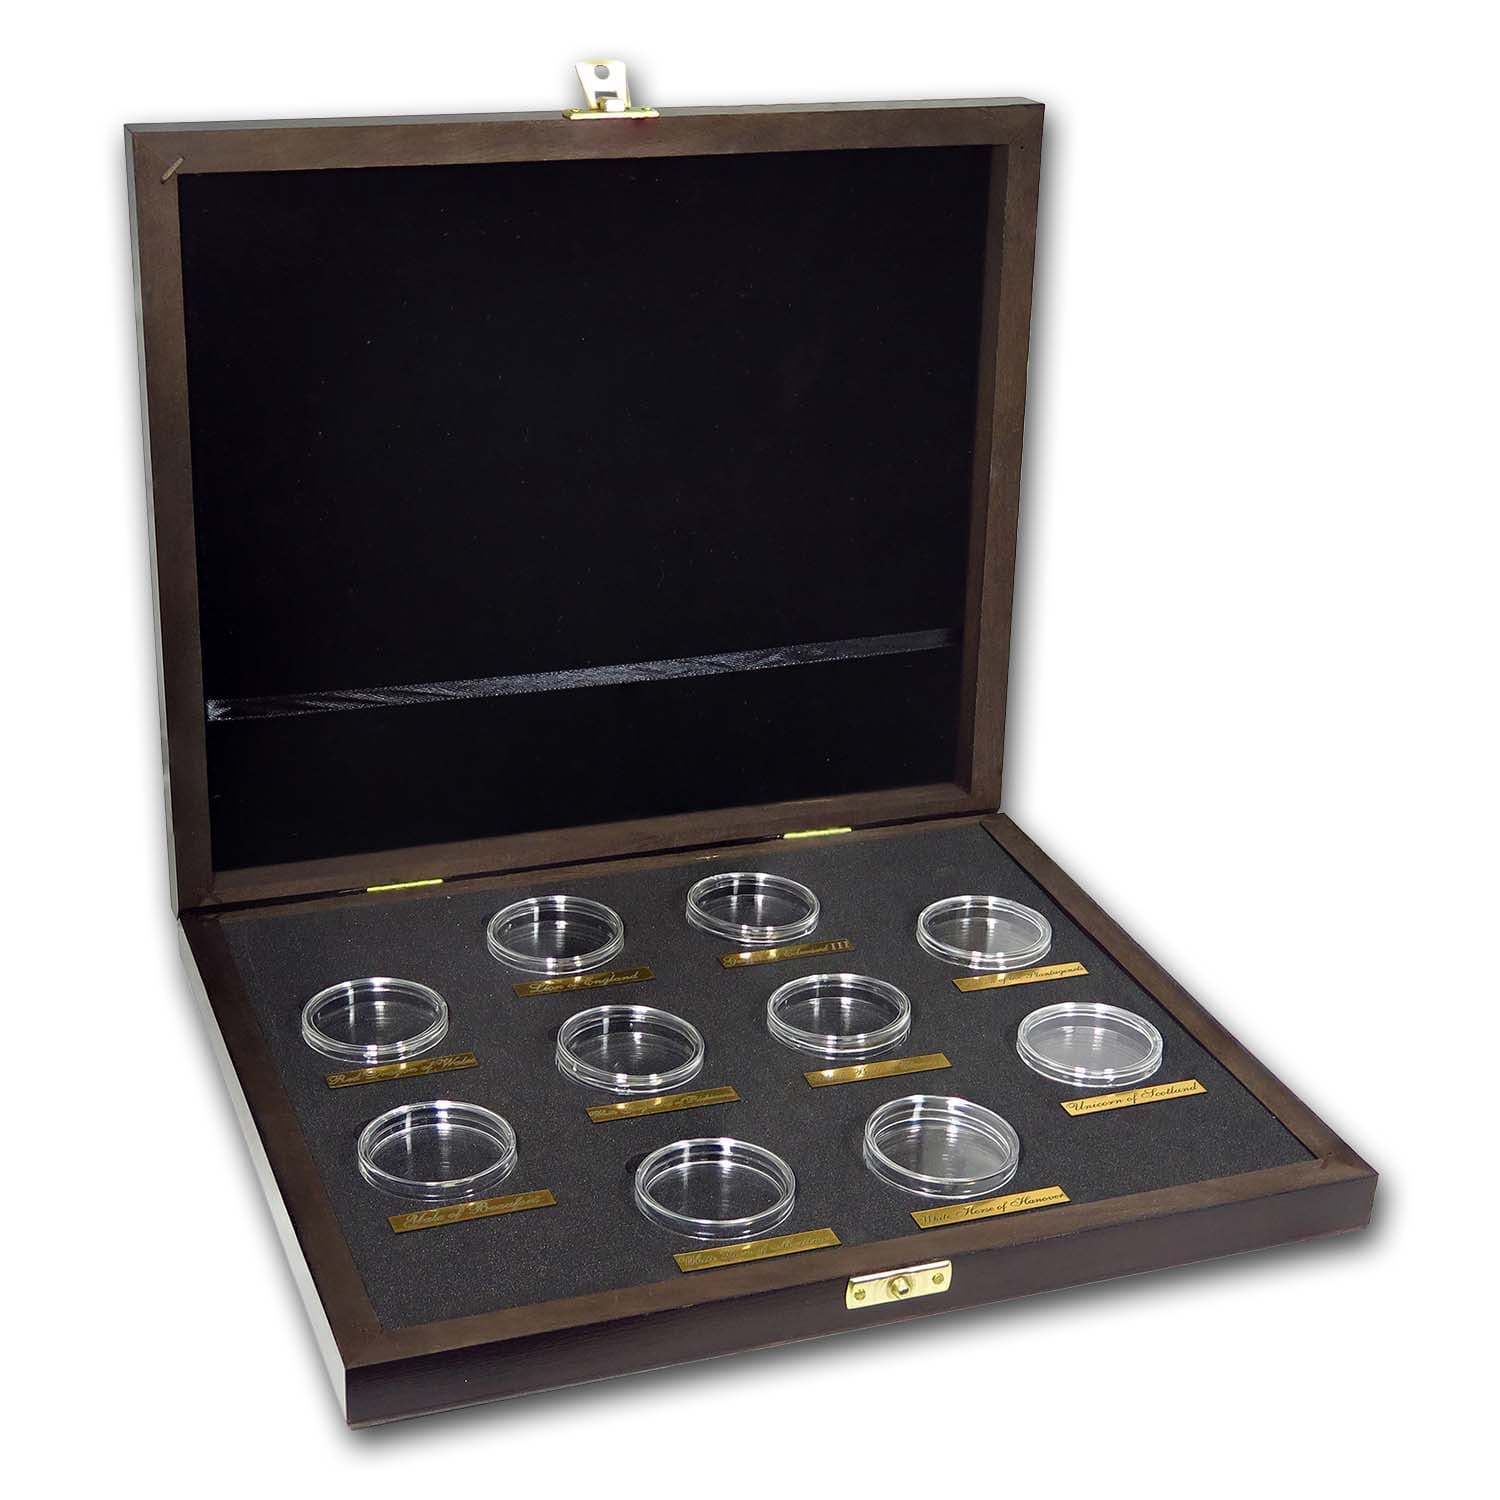 Buy Wooden Presentation Box - GB 2 oz Silver Queen's Beasts Series